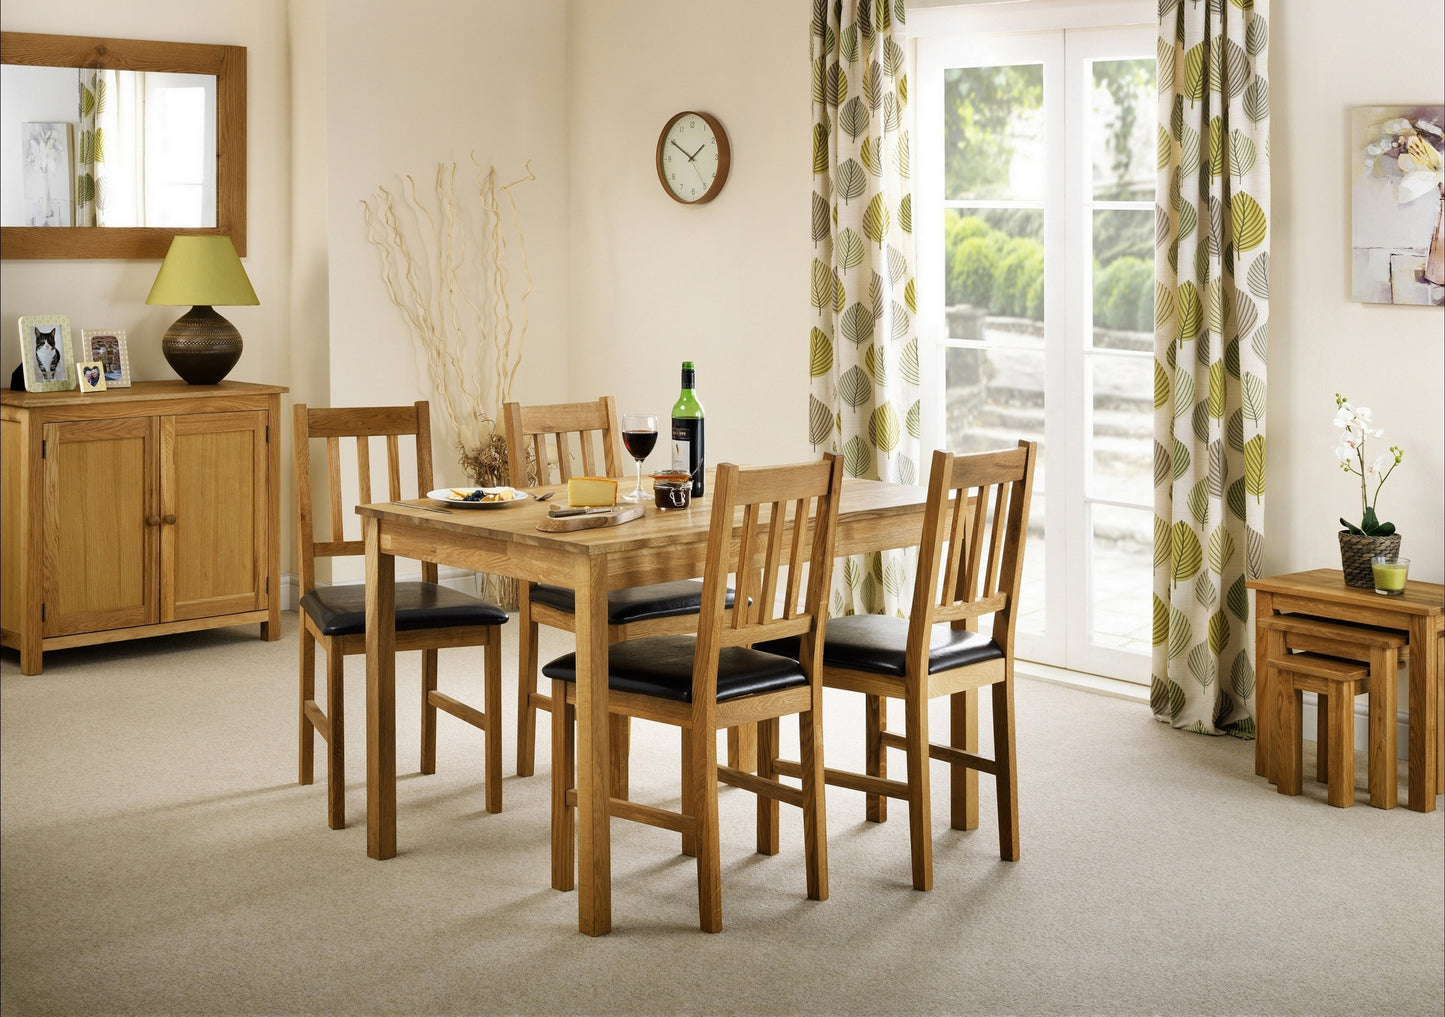 Solid Oak with an Oiled Finish Dining Chair